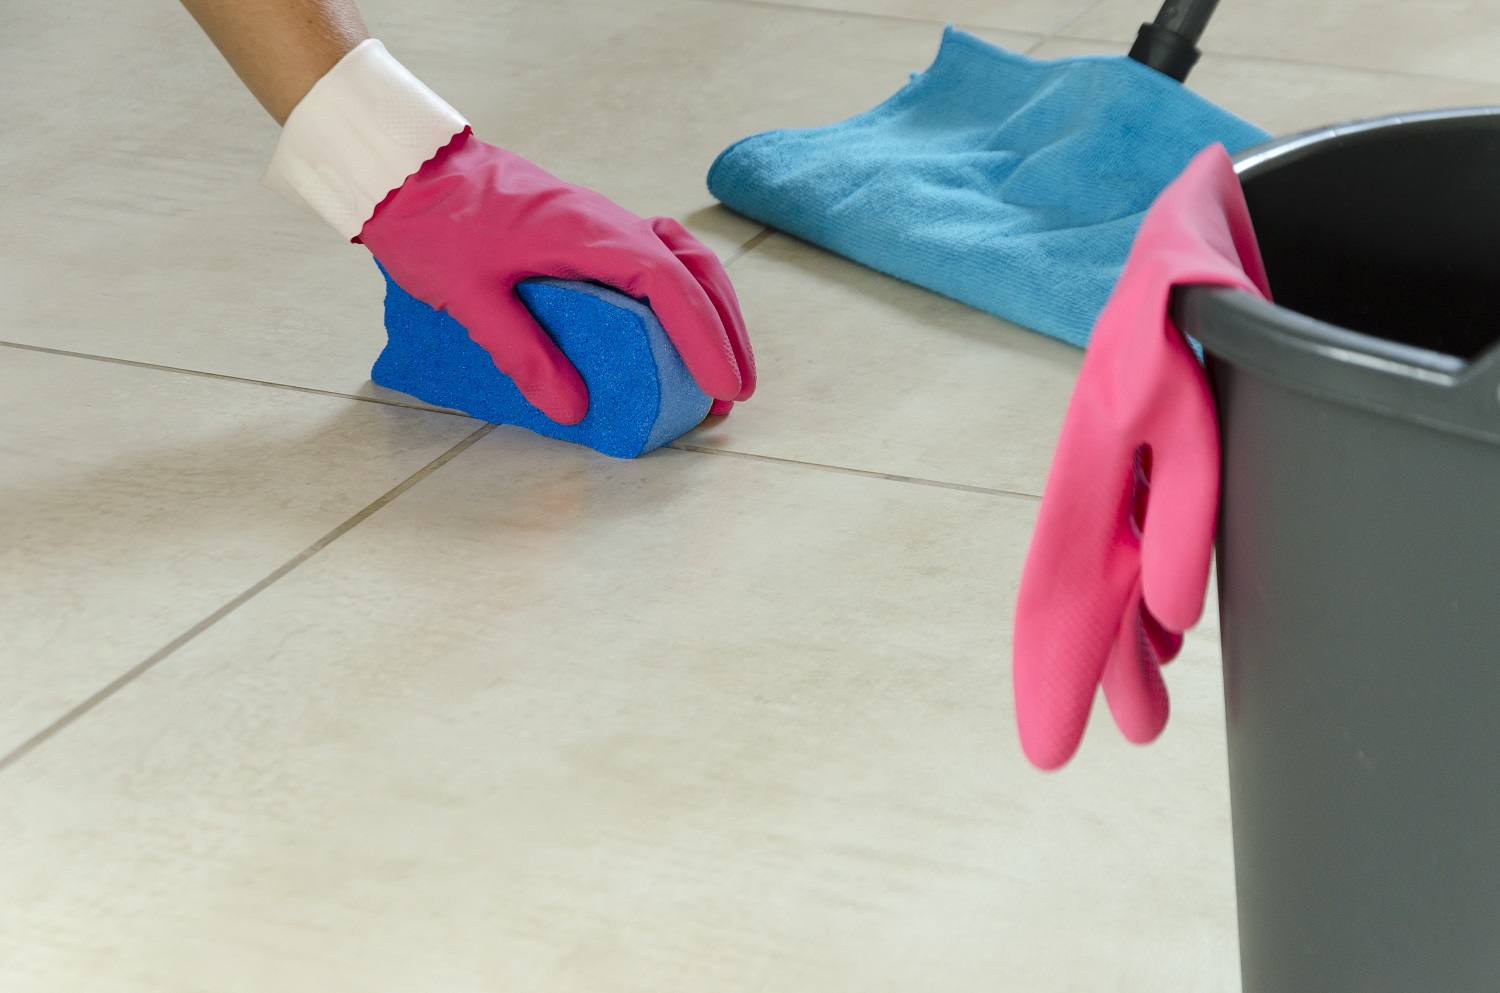 Close up product image of someone wearing pink rubber gloves cleaning their floor tiles with a sponge and mop